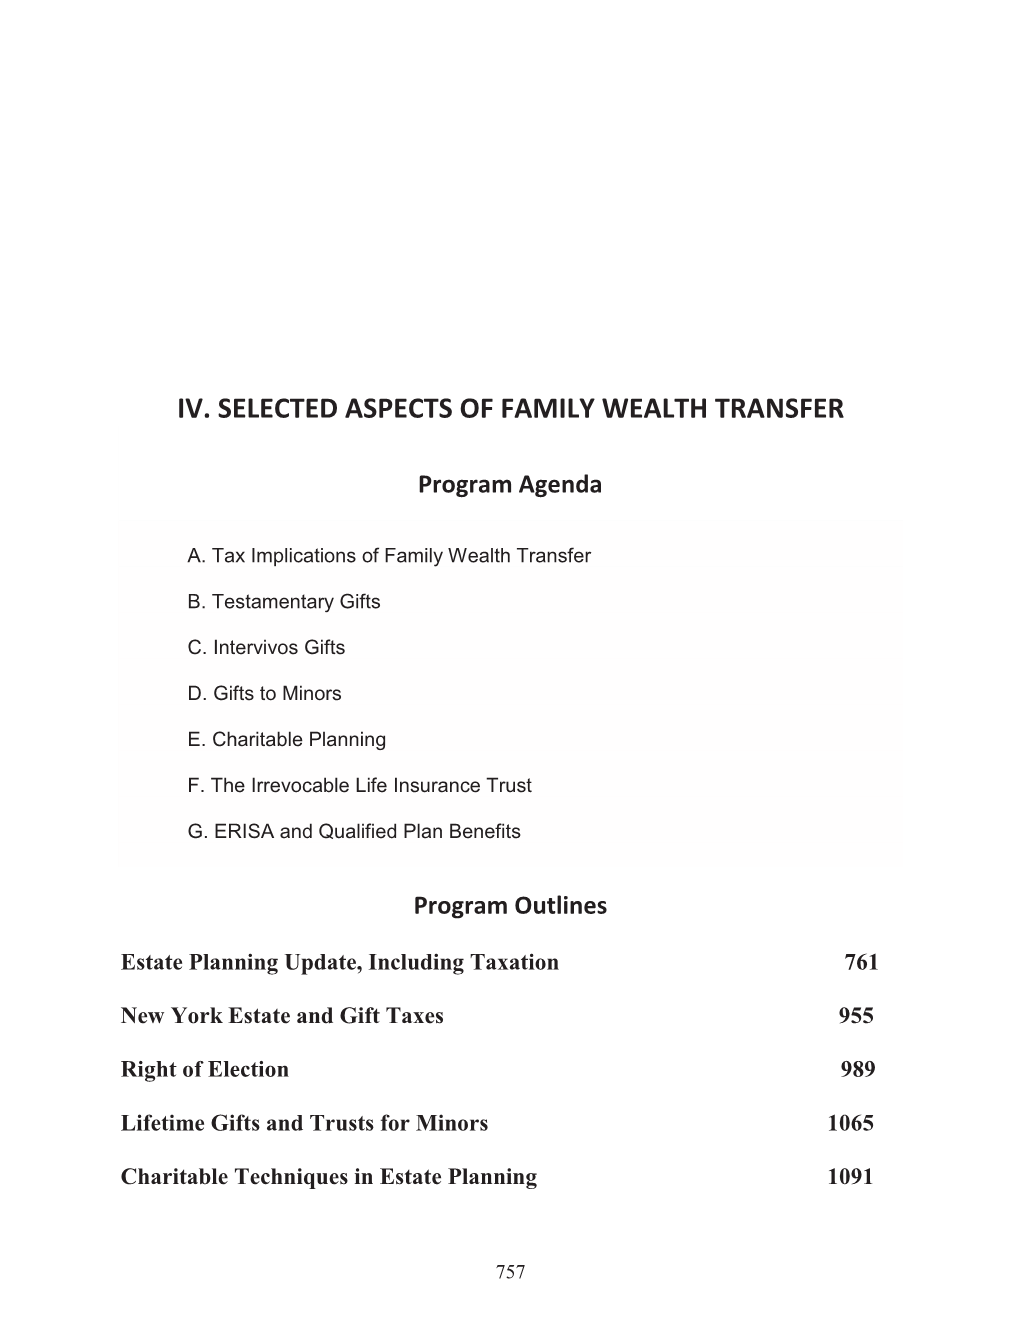 Iv. Selected Aspects of Family Wealth Transfer